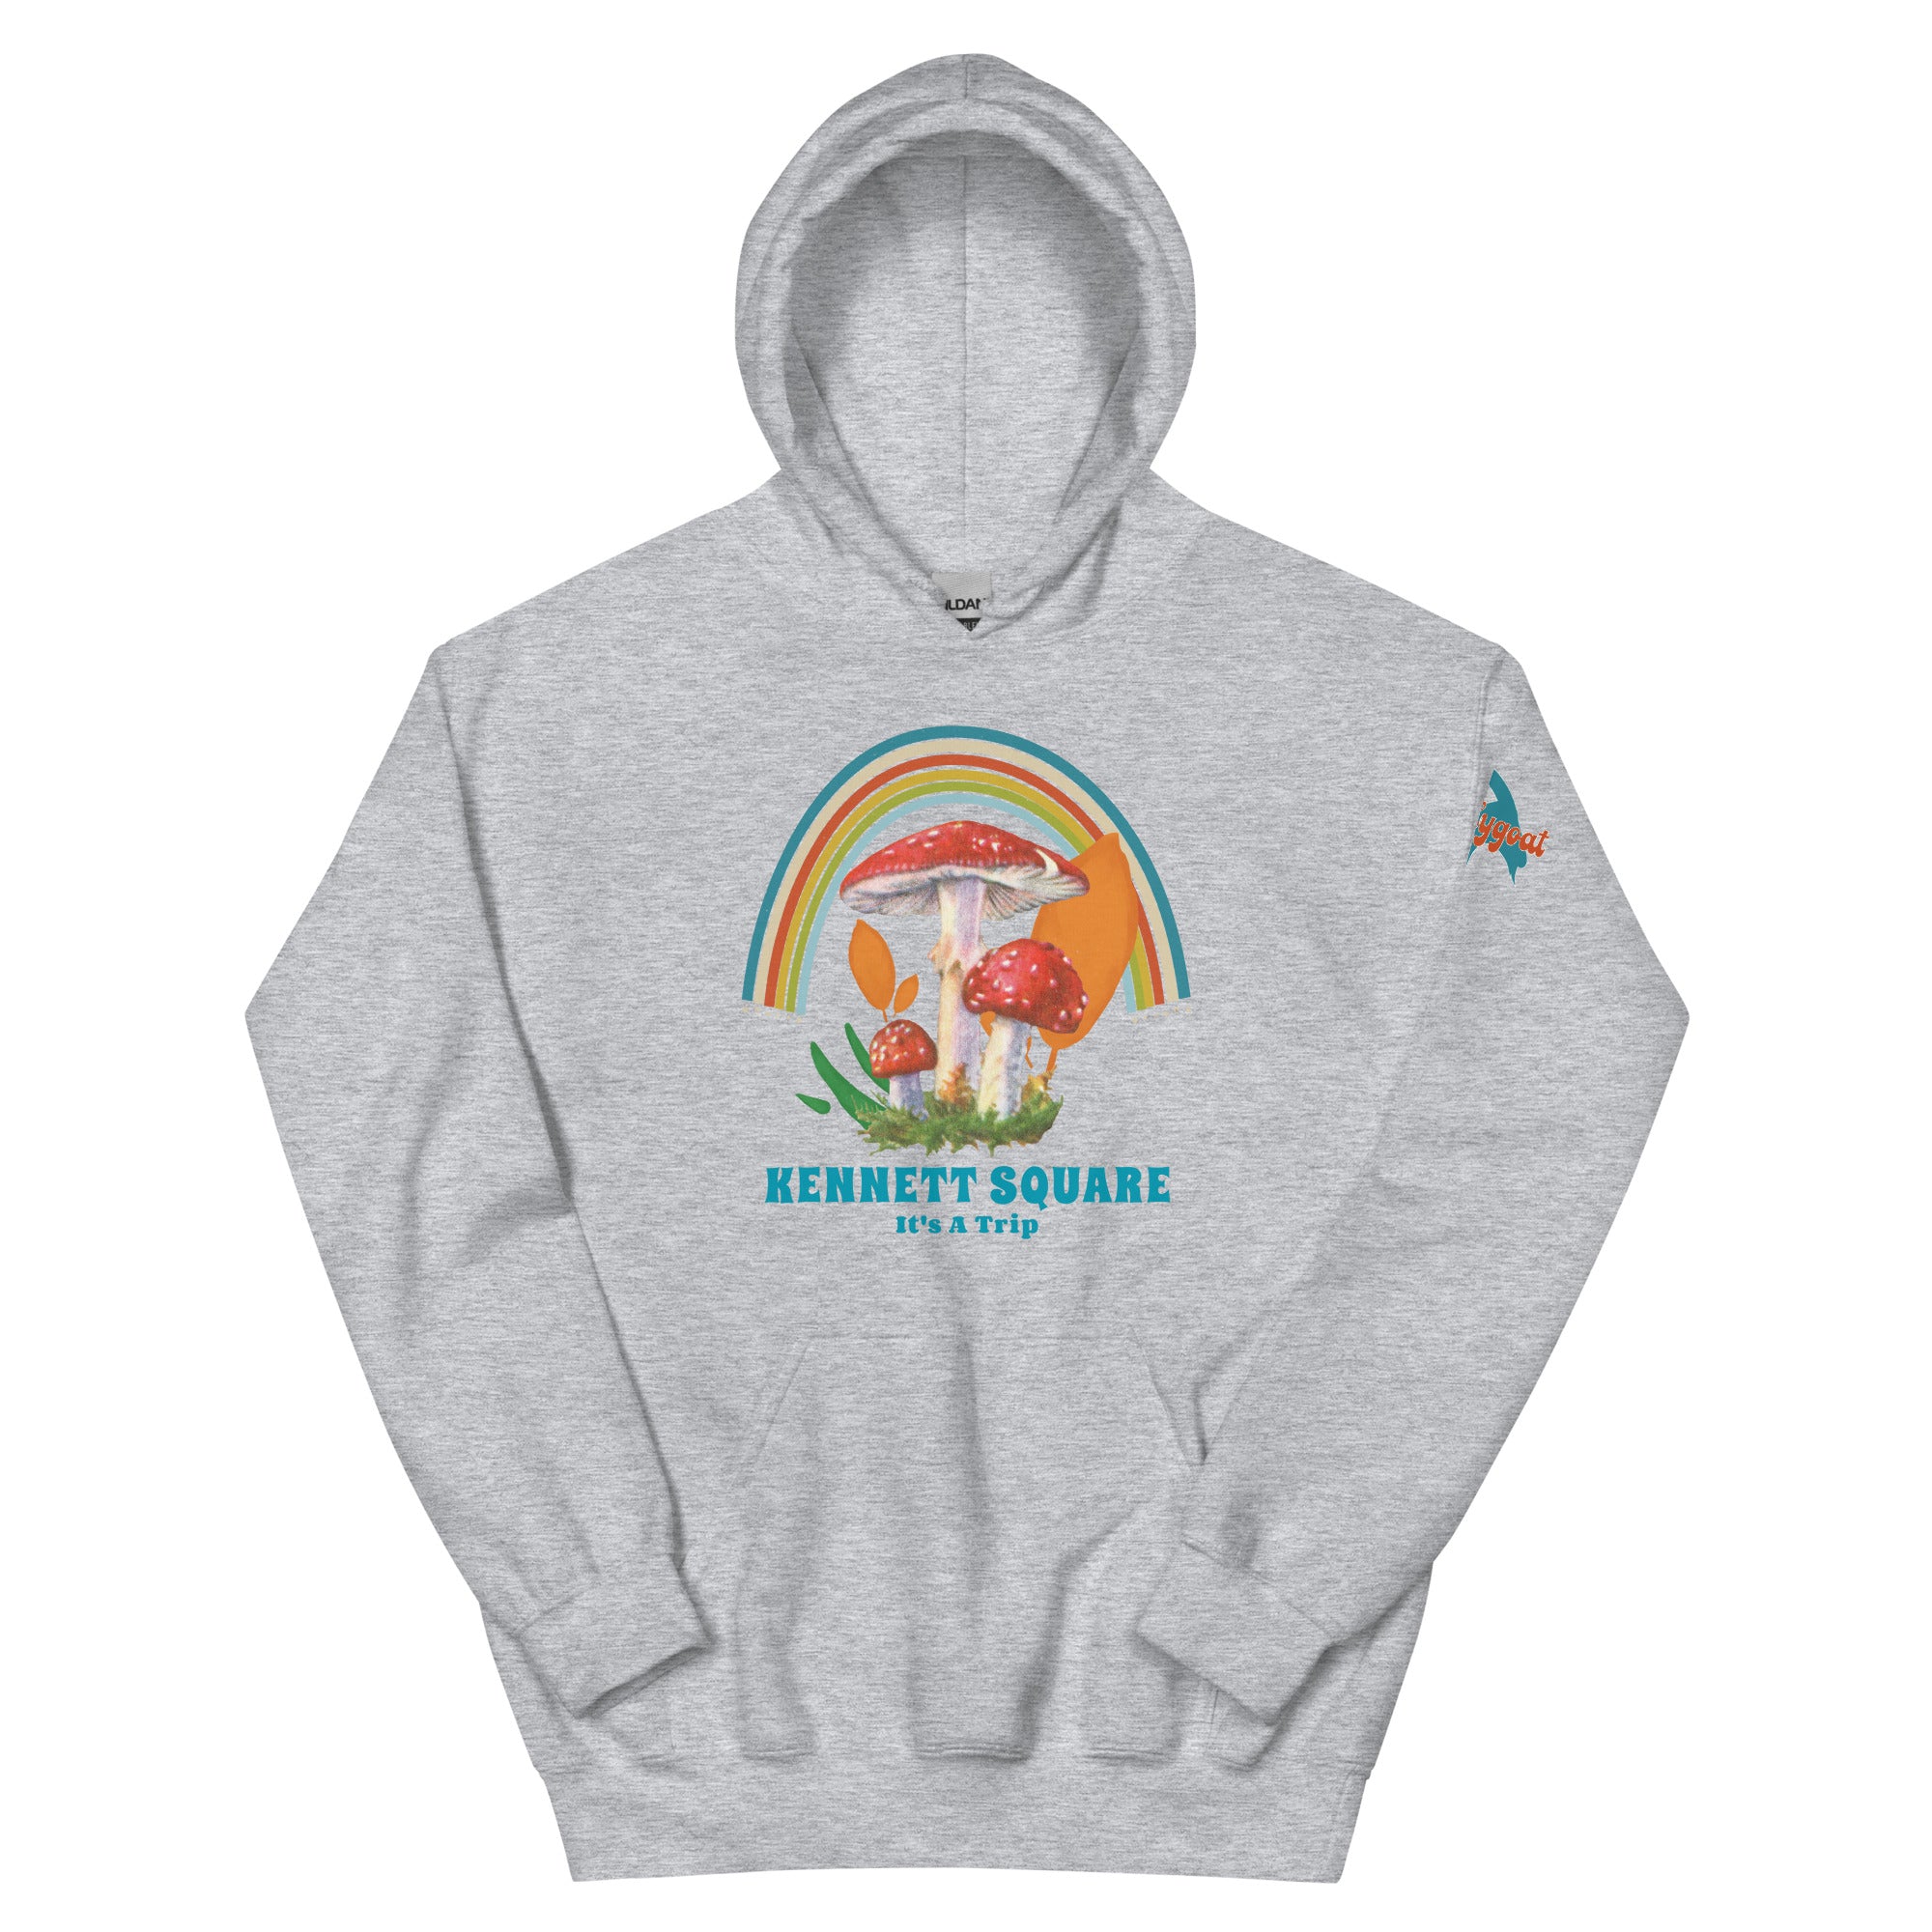 "Kennett Square Is a Trip" Hoodie